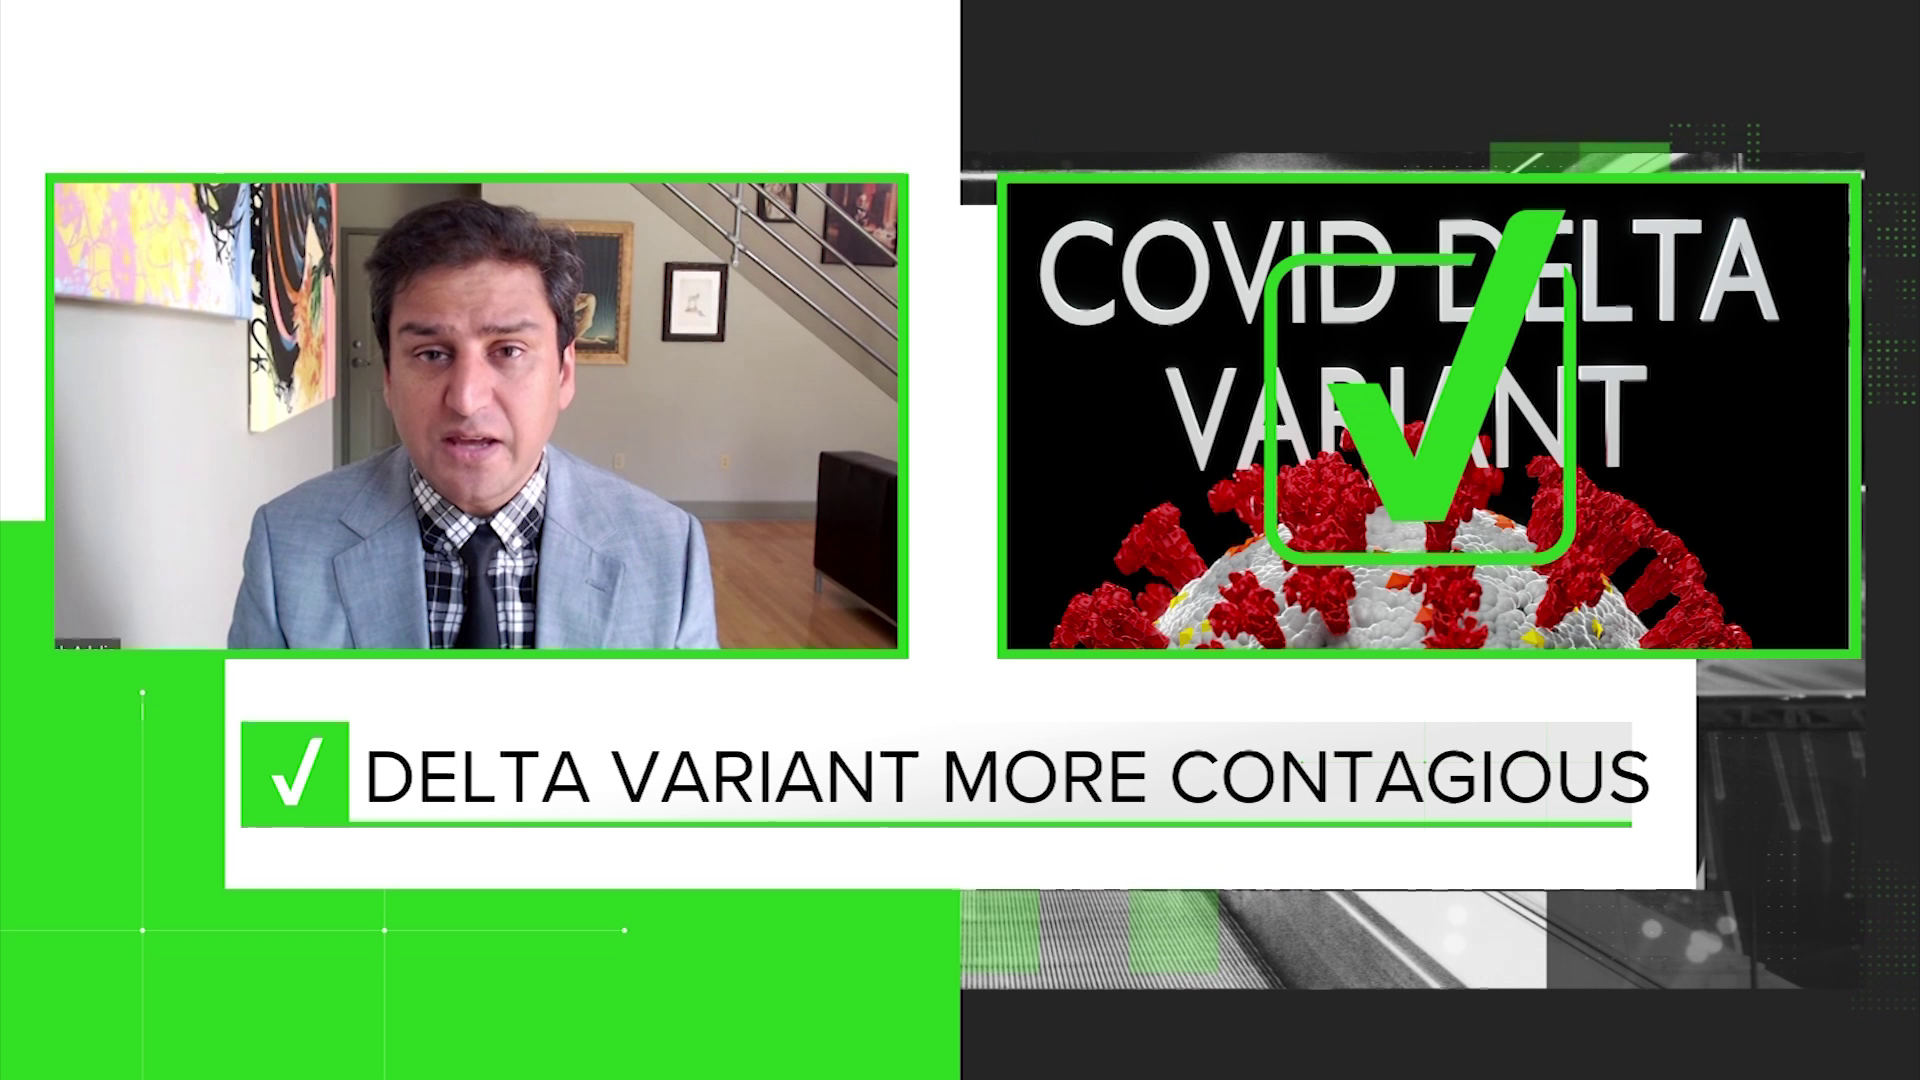 The COVID-19 Delta variant has many people concerned as cases continue to climb. The VERIFY team is taking viewers' questions and concerns to the experts.